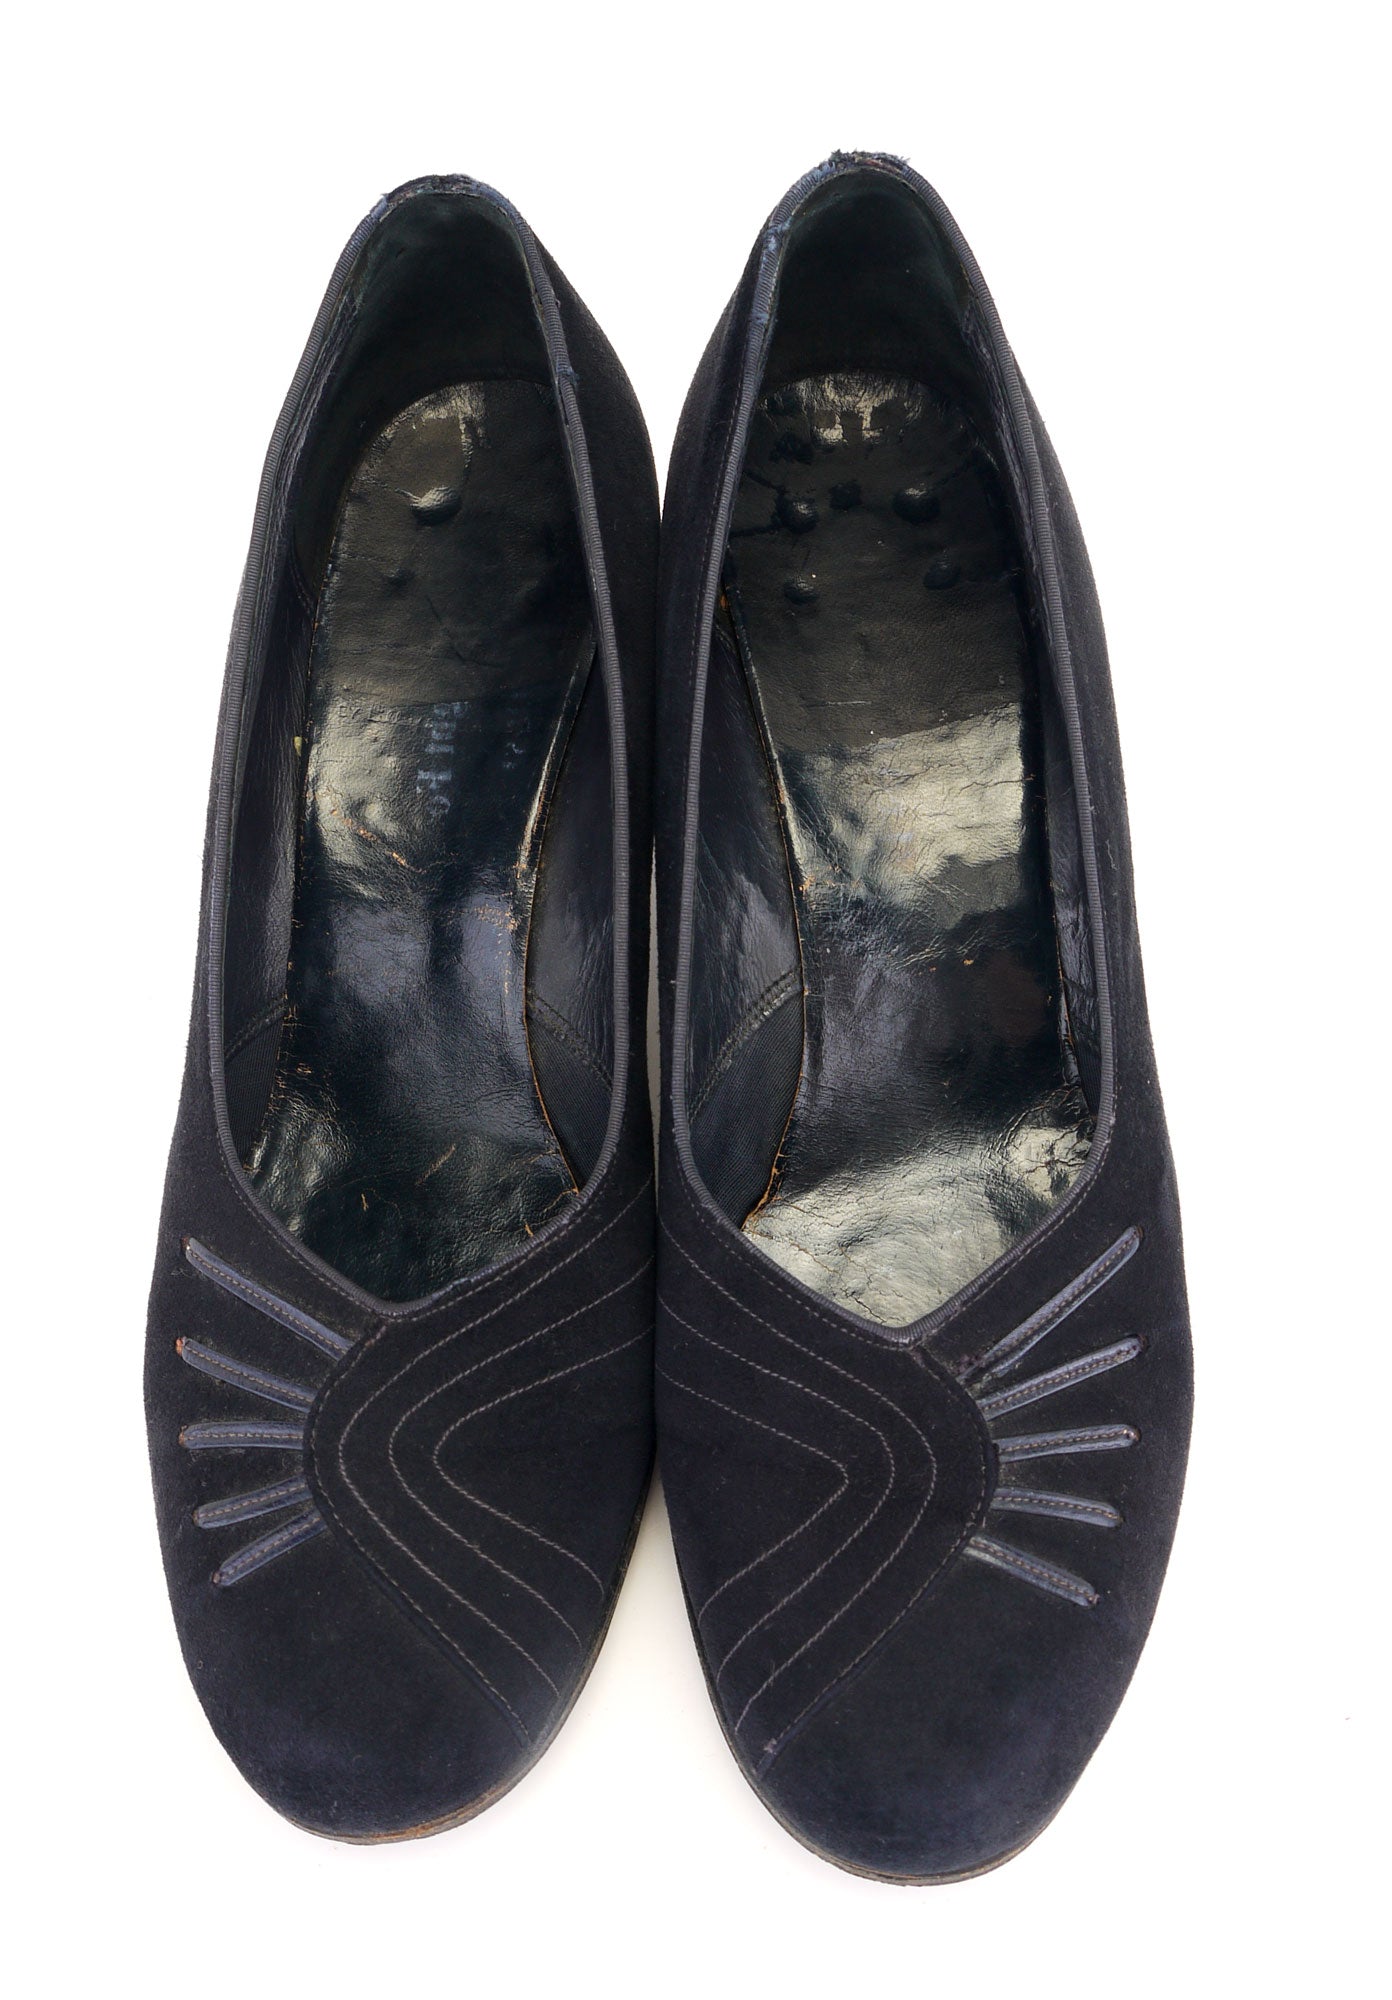 Midnight Blue 1940s Pumps by Lilley & Skinner UK 6.5